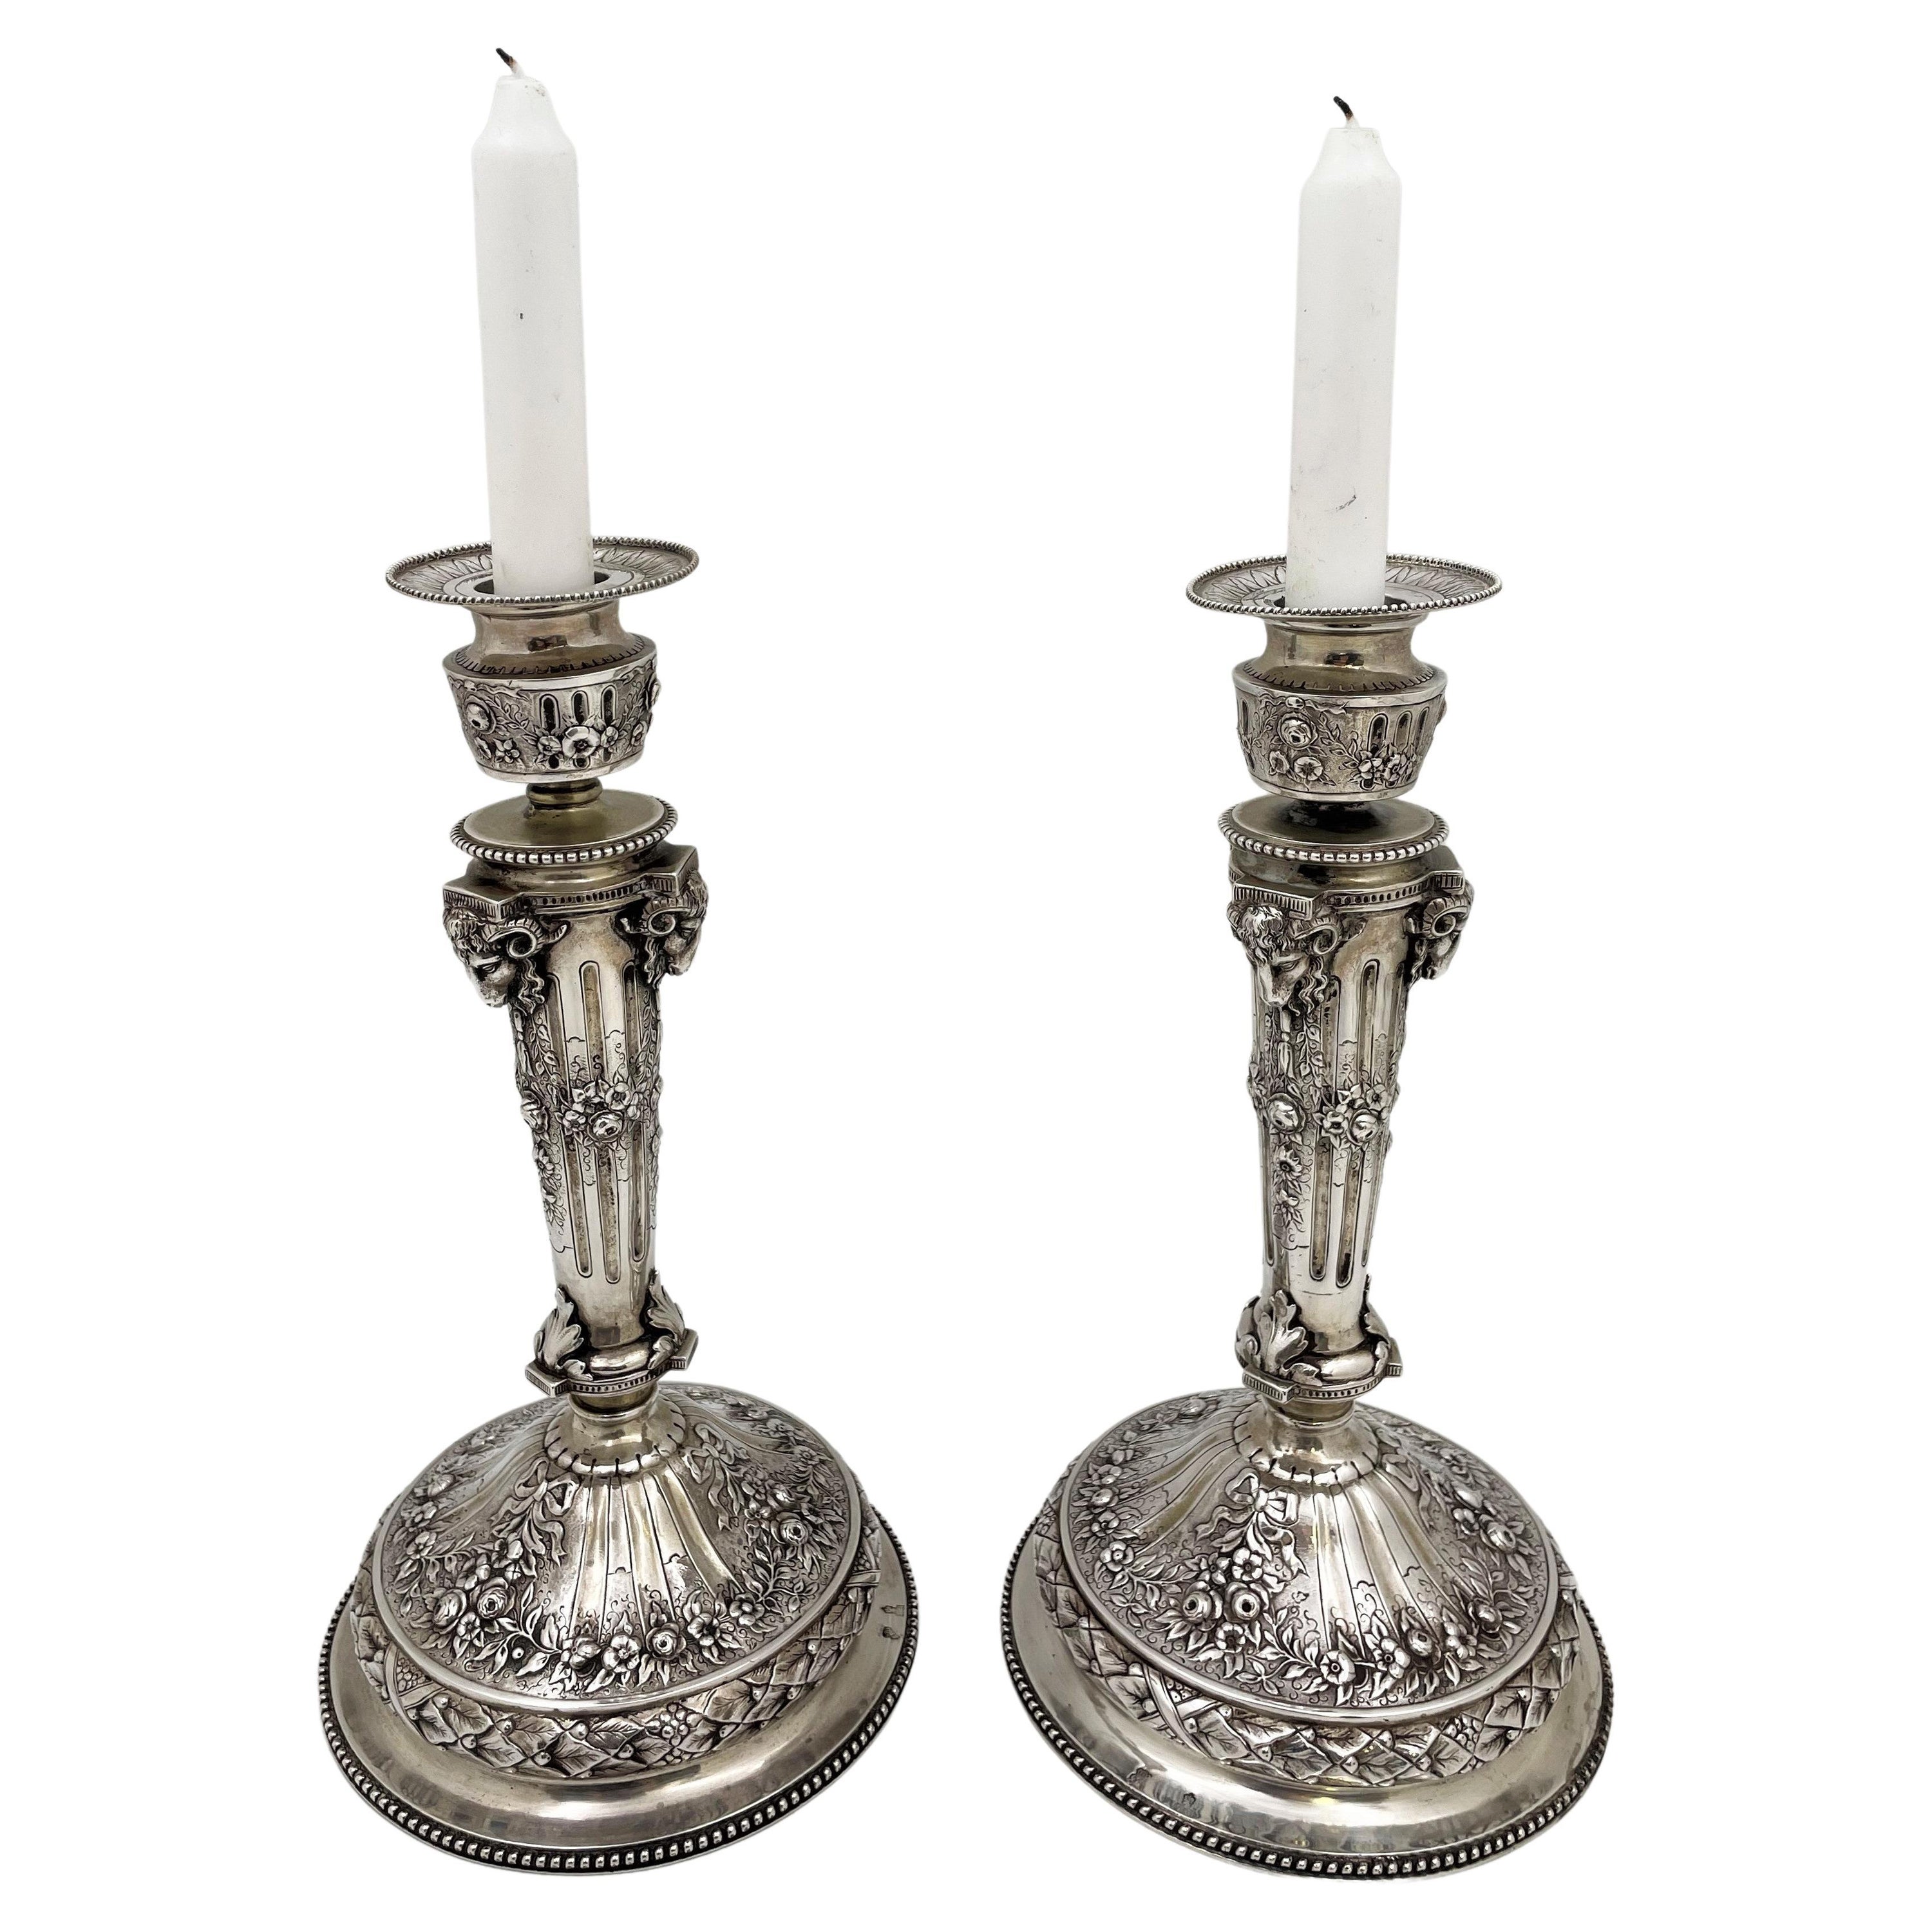 Pair of Continental Chased Silver Candlesticks from 19th Century with Rams' Head For Sale